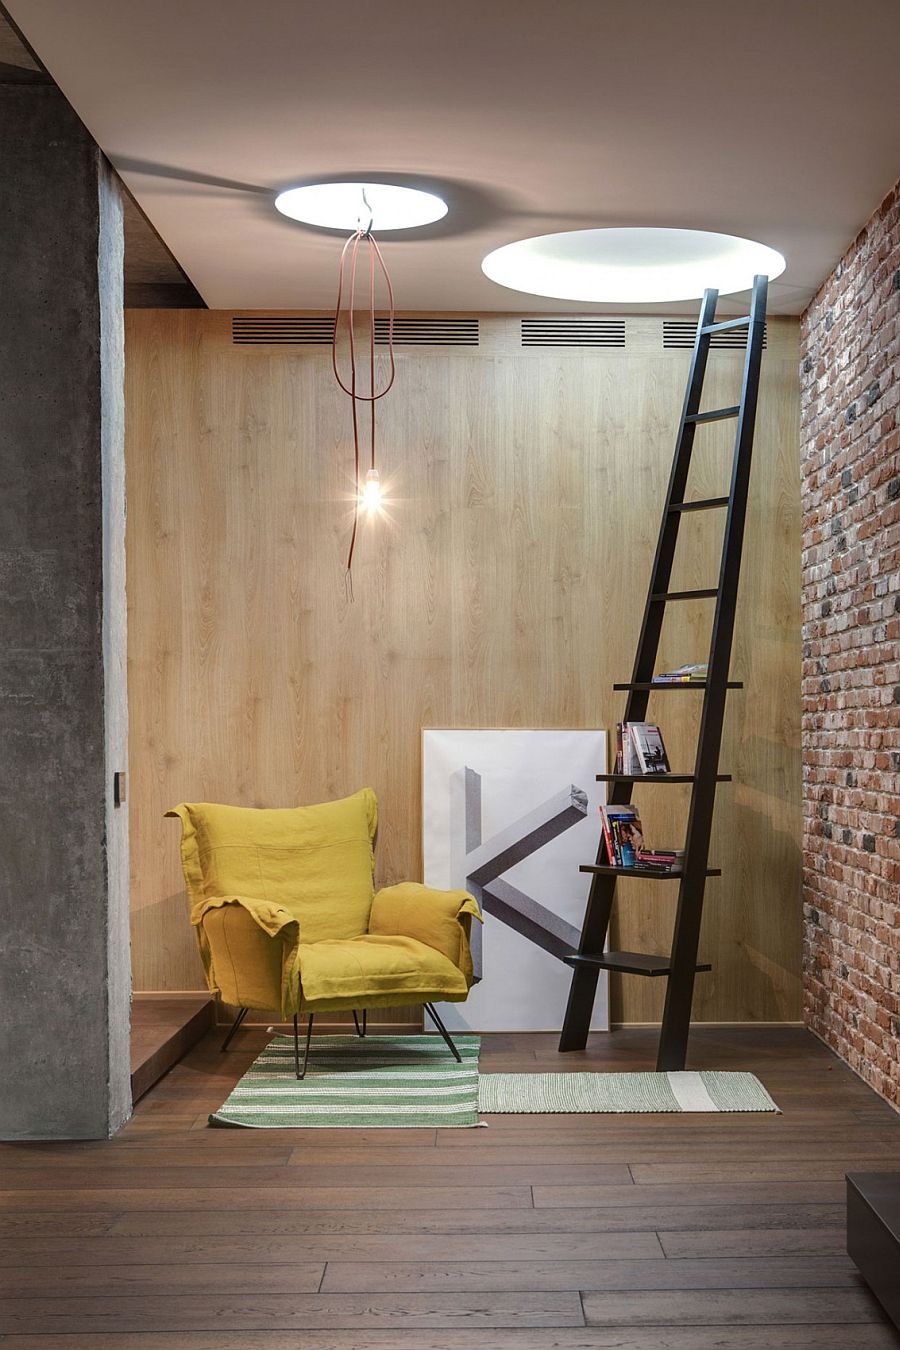 Lovely reading nook with brick wall, bright yellow chair and a stylish ladder used as book rack